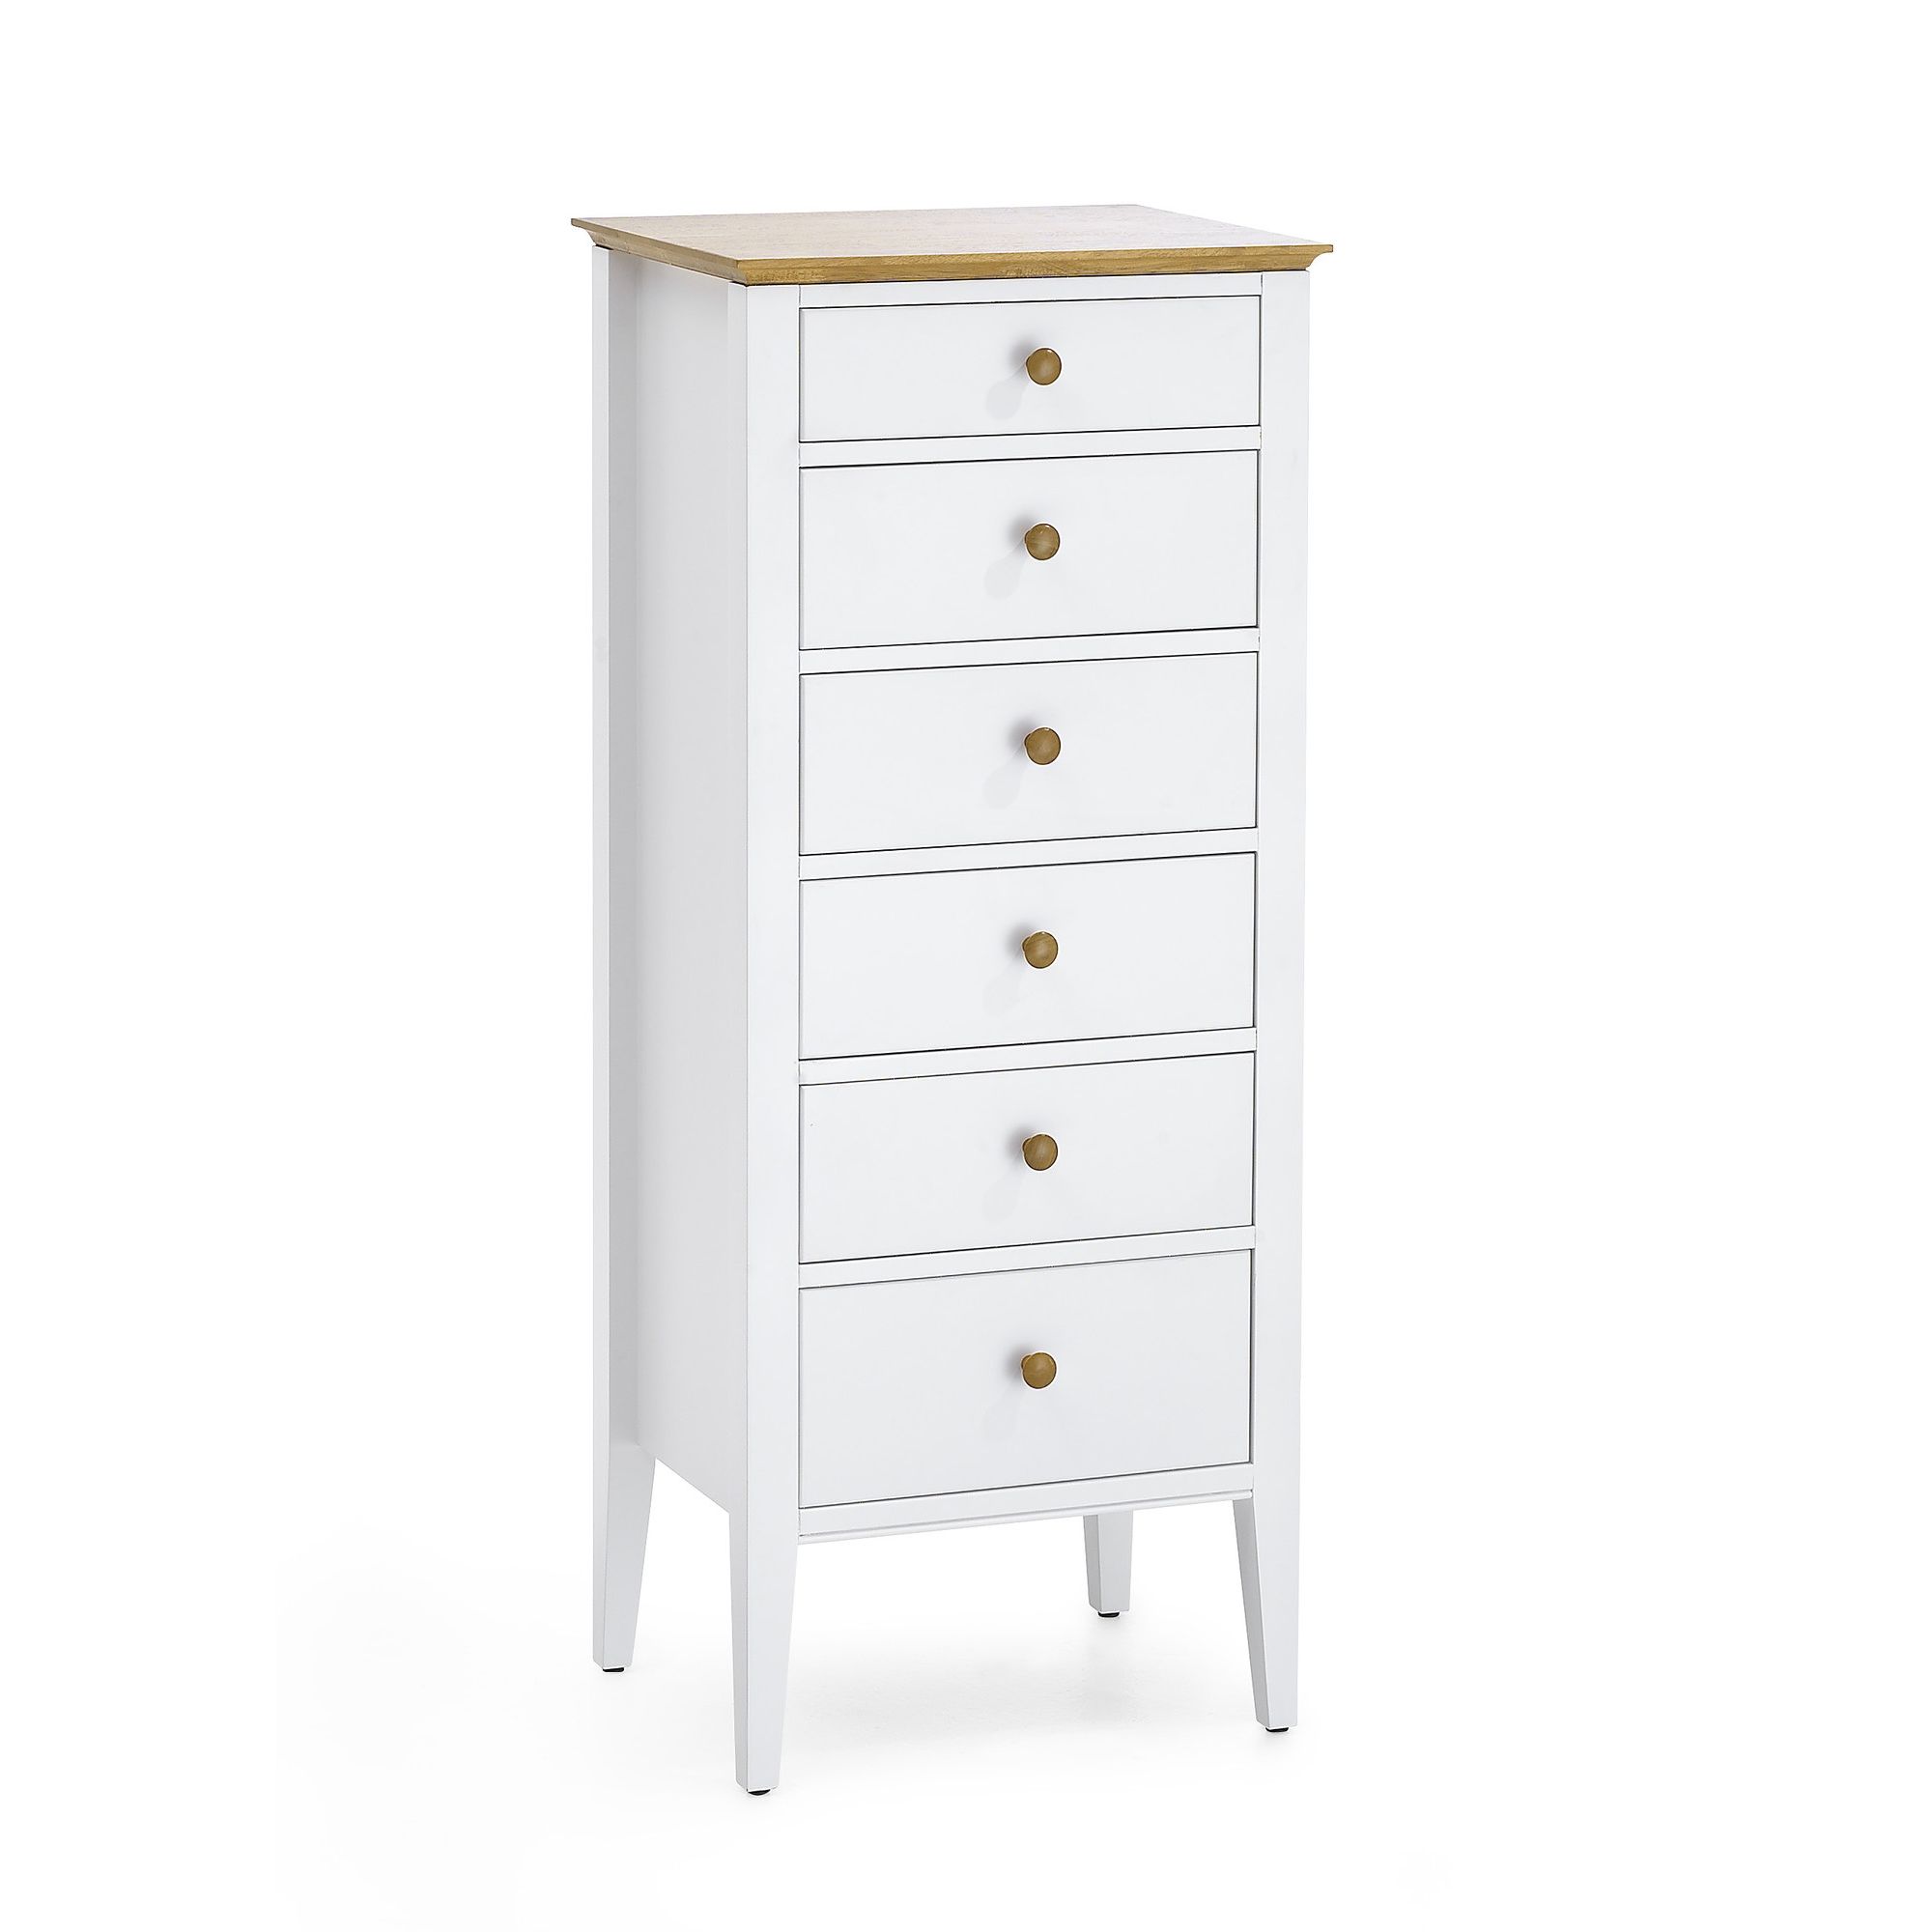 Serene Furnishings Grace 6 Drawer Wellington Tallboy Chest - Golden Cherry with Opal White at Tesco Direct